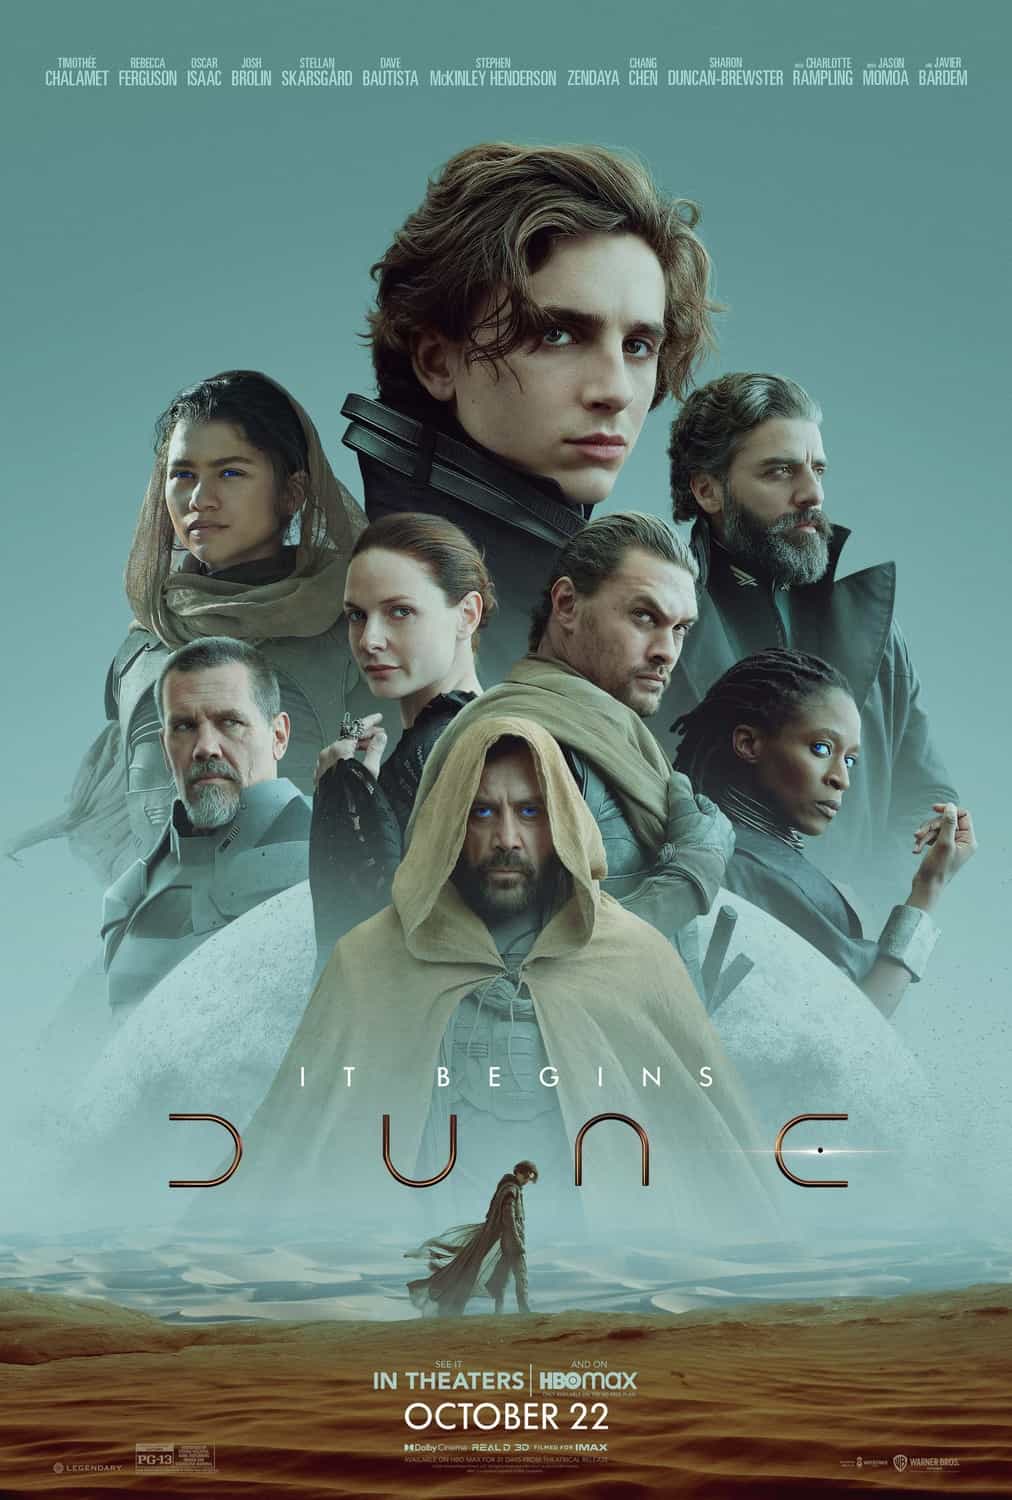 UK Box Office Weekend Report 22nd - 24th October 2021: Dune tops the UK box office on its debut after 3 weeks from Bond